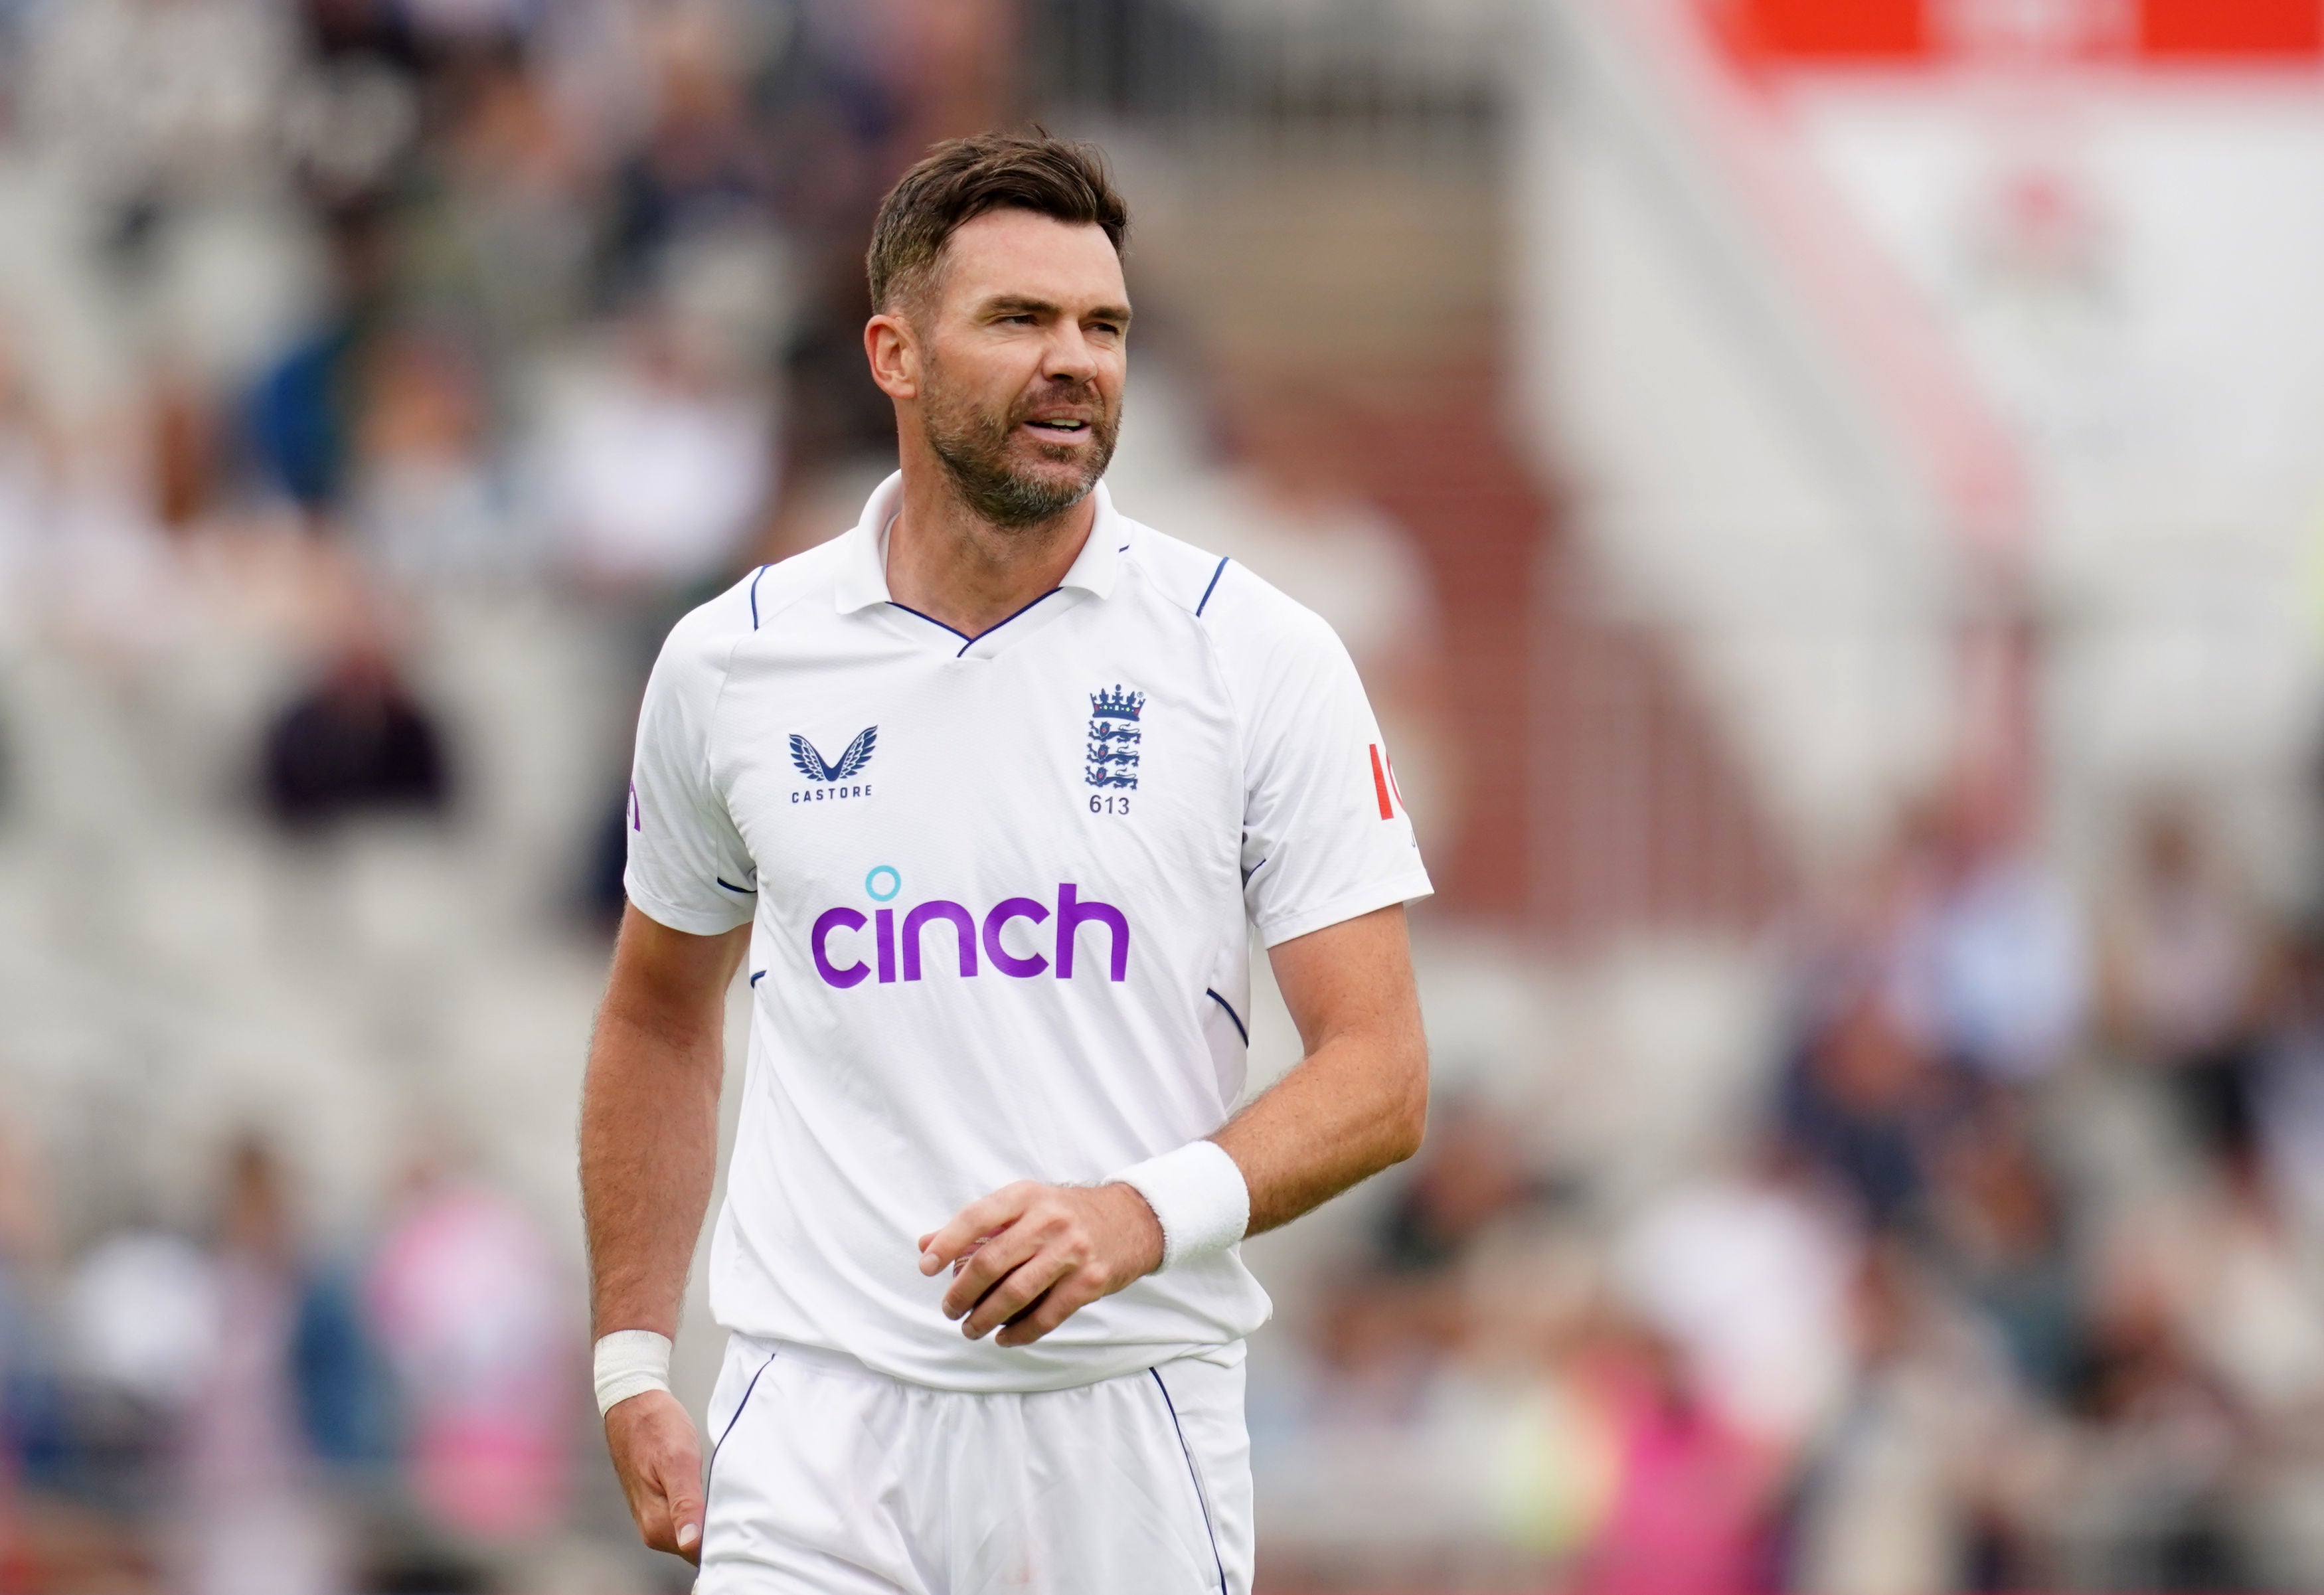 England are expecting James Anderson to lead the bowling attack for next month’s Ashes series